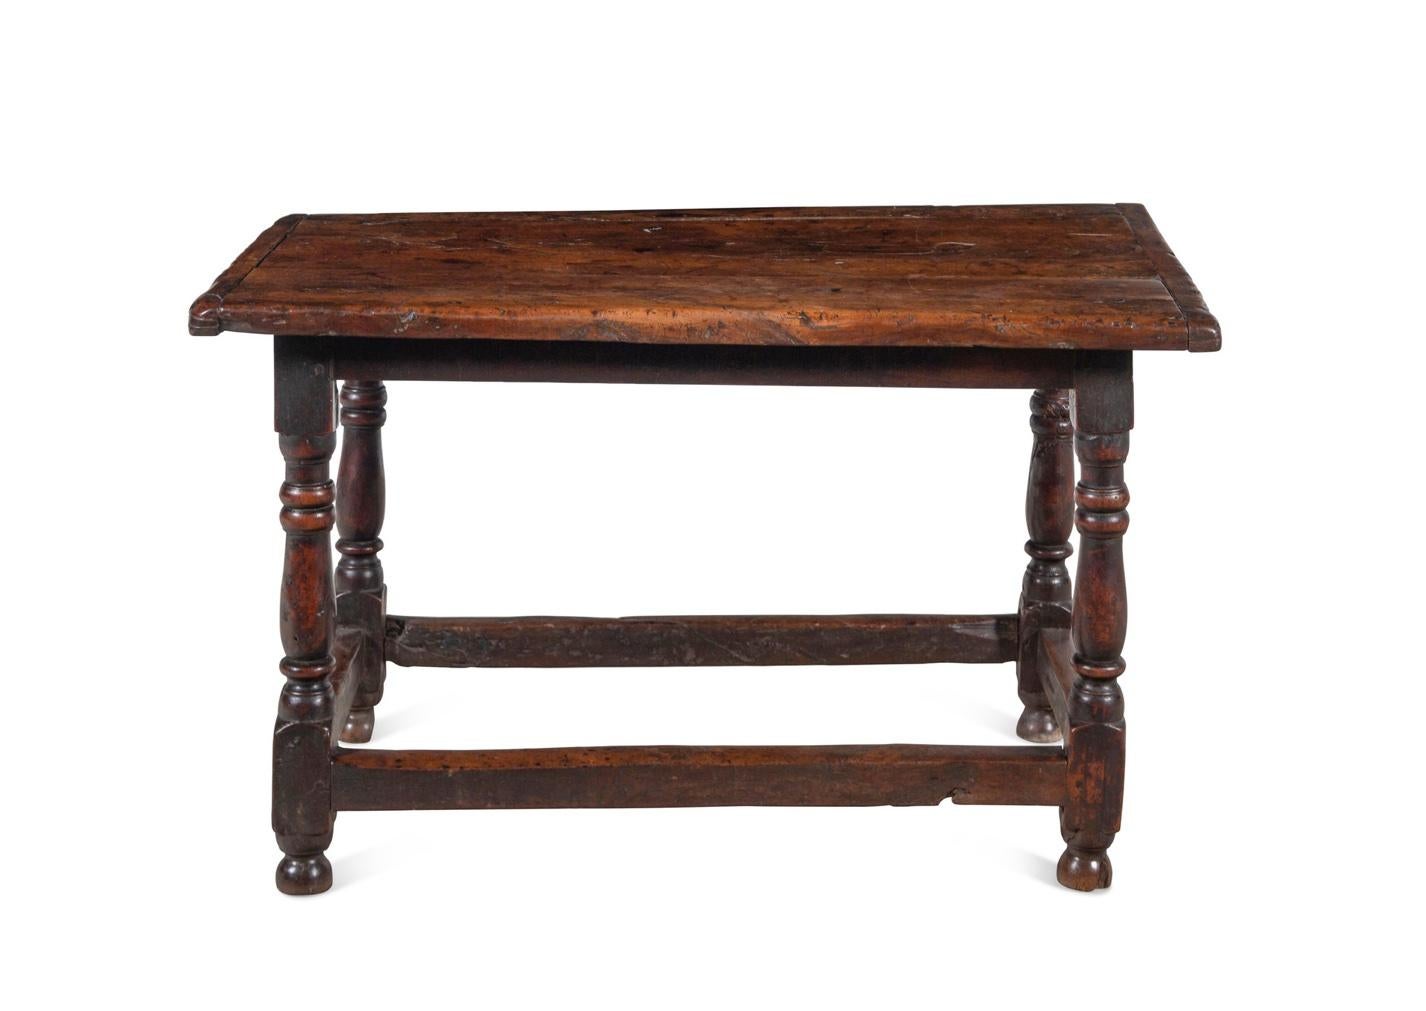 English A William And Mary 17th Century Walnut Table, Exceptional Color And Patination. For Sale